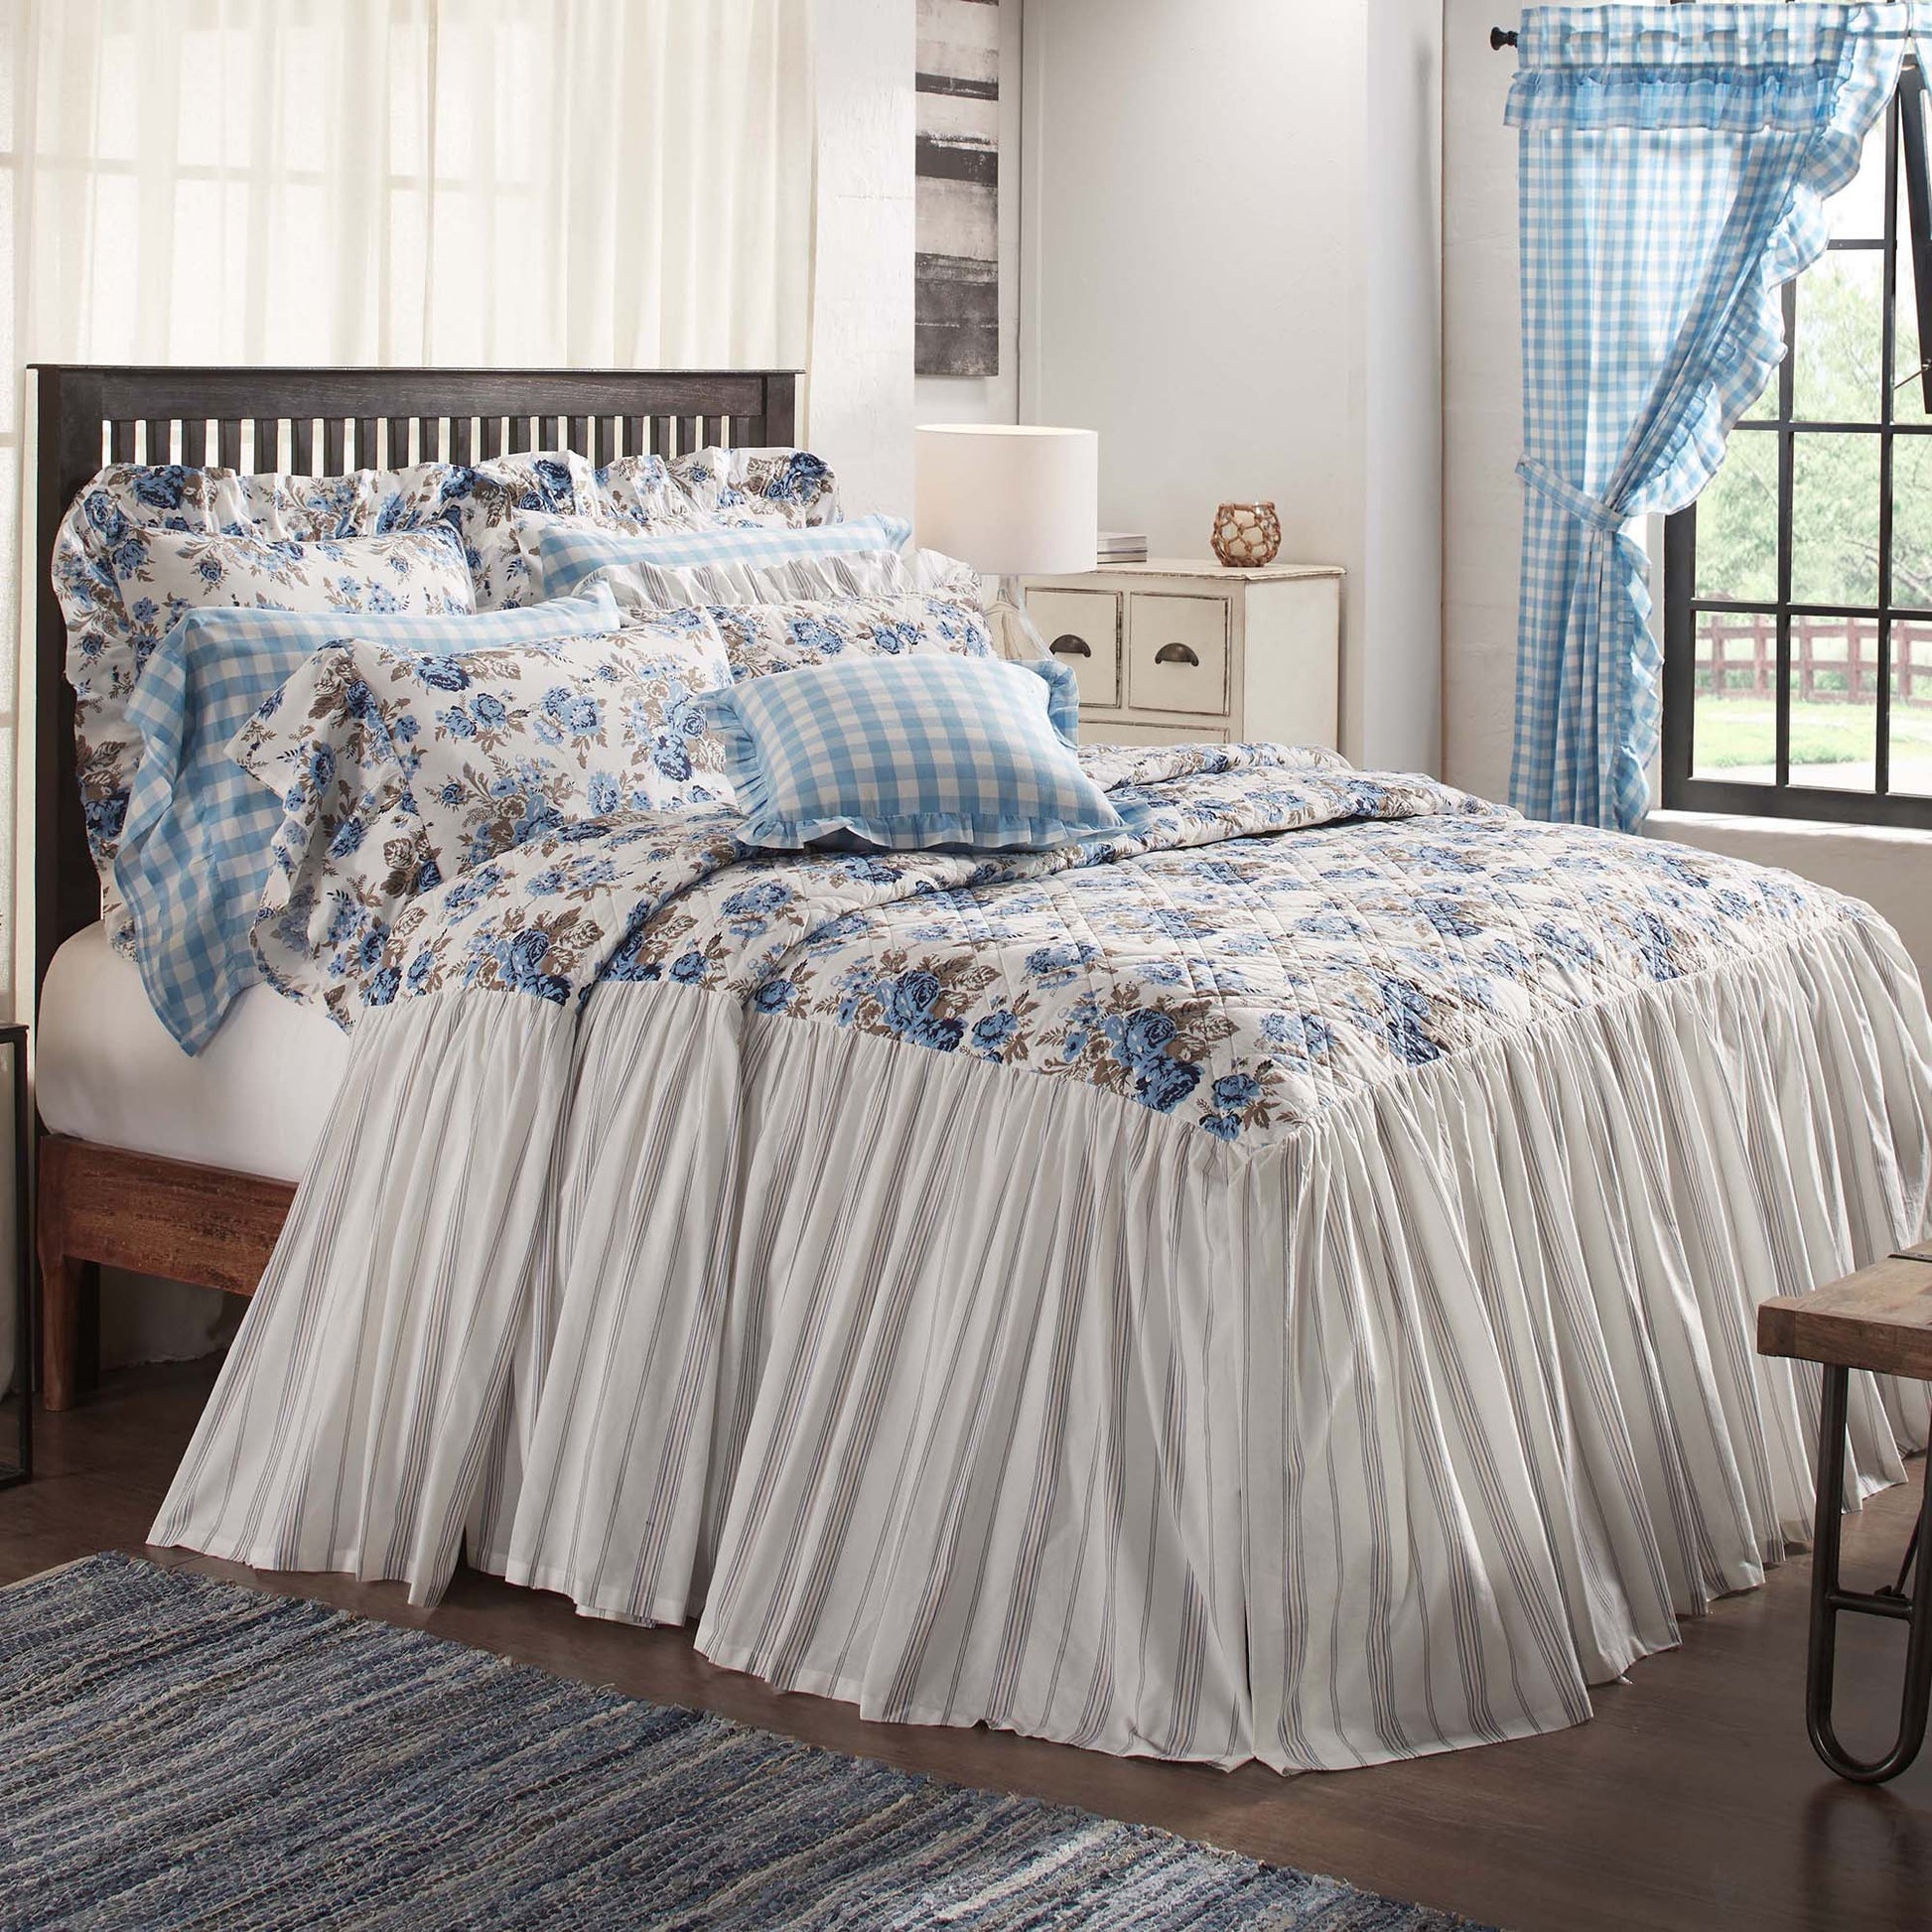 69994-Annie-Blue-Floral-Ruffled-King-Coverlet-80x76-27-image-3